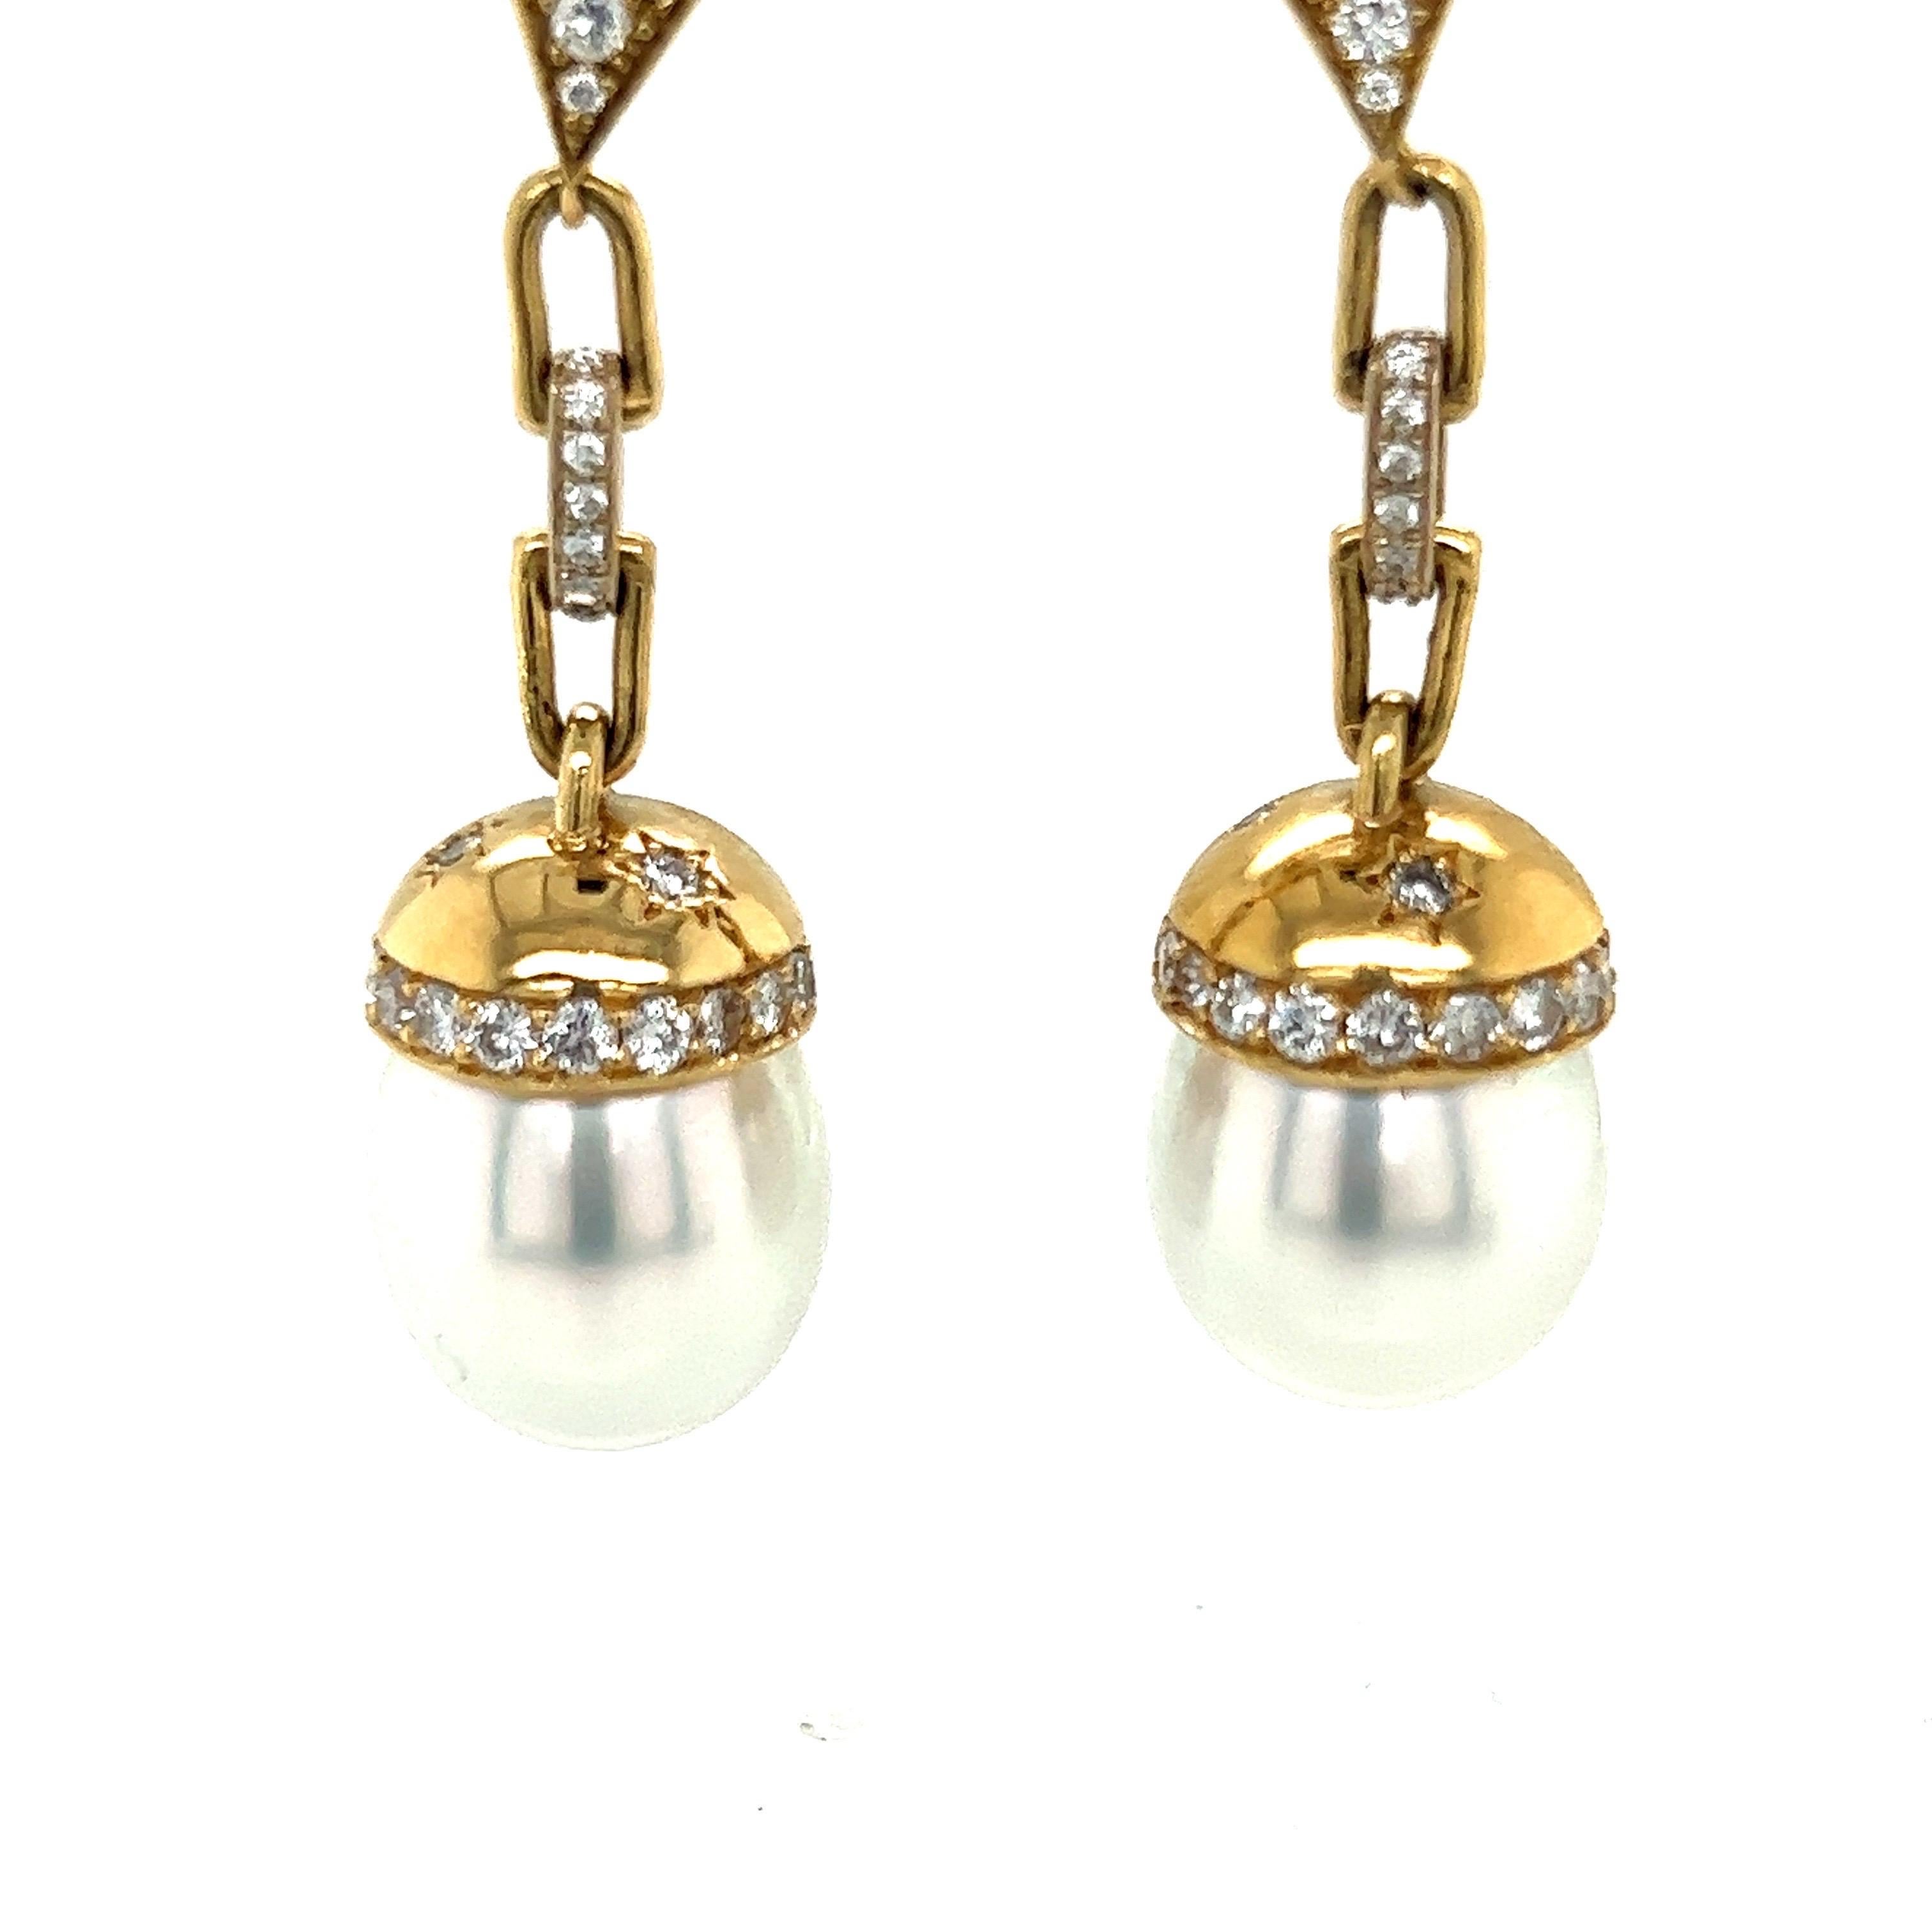 White South Sea drop pearl earrings in 18k
yellow gold with white diamonds

Total diamond weight approx. 1.88ct 
G-H color, VS-2/SI-1 clarity

51-52mm long
